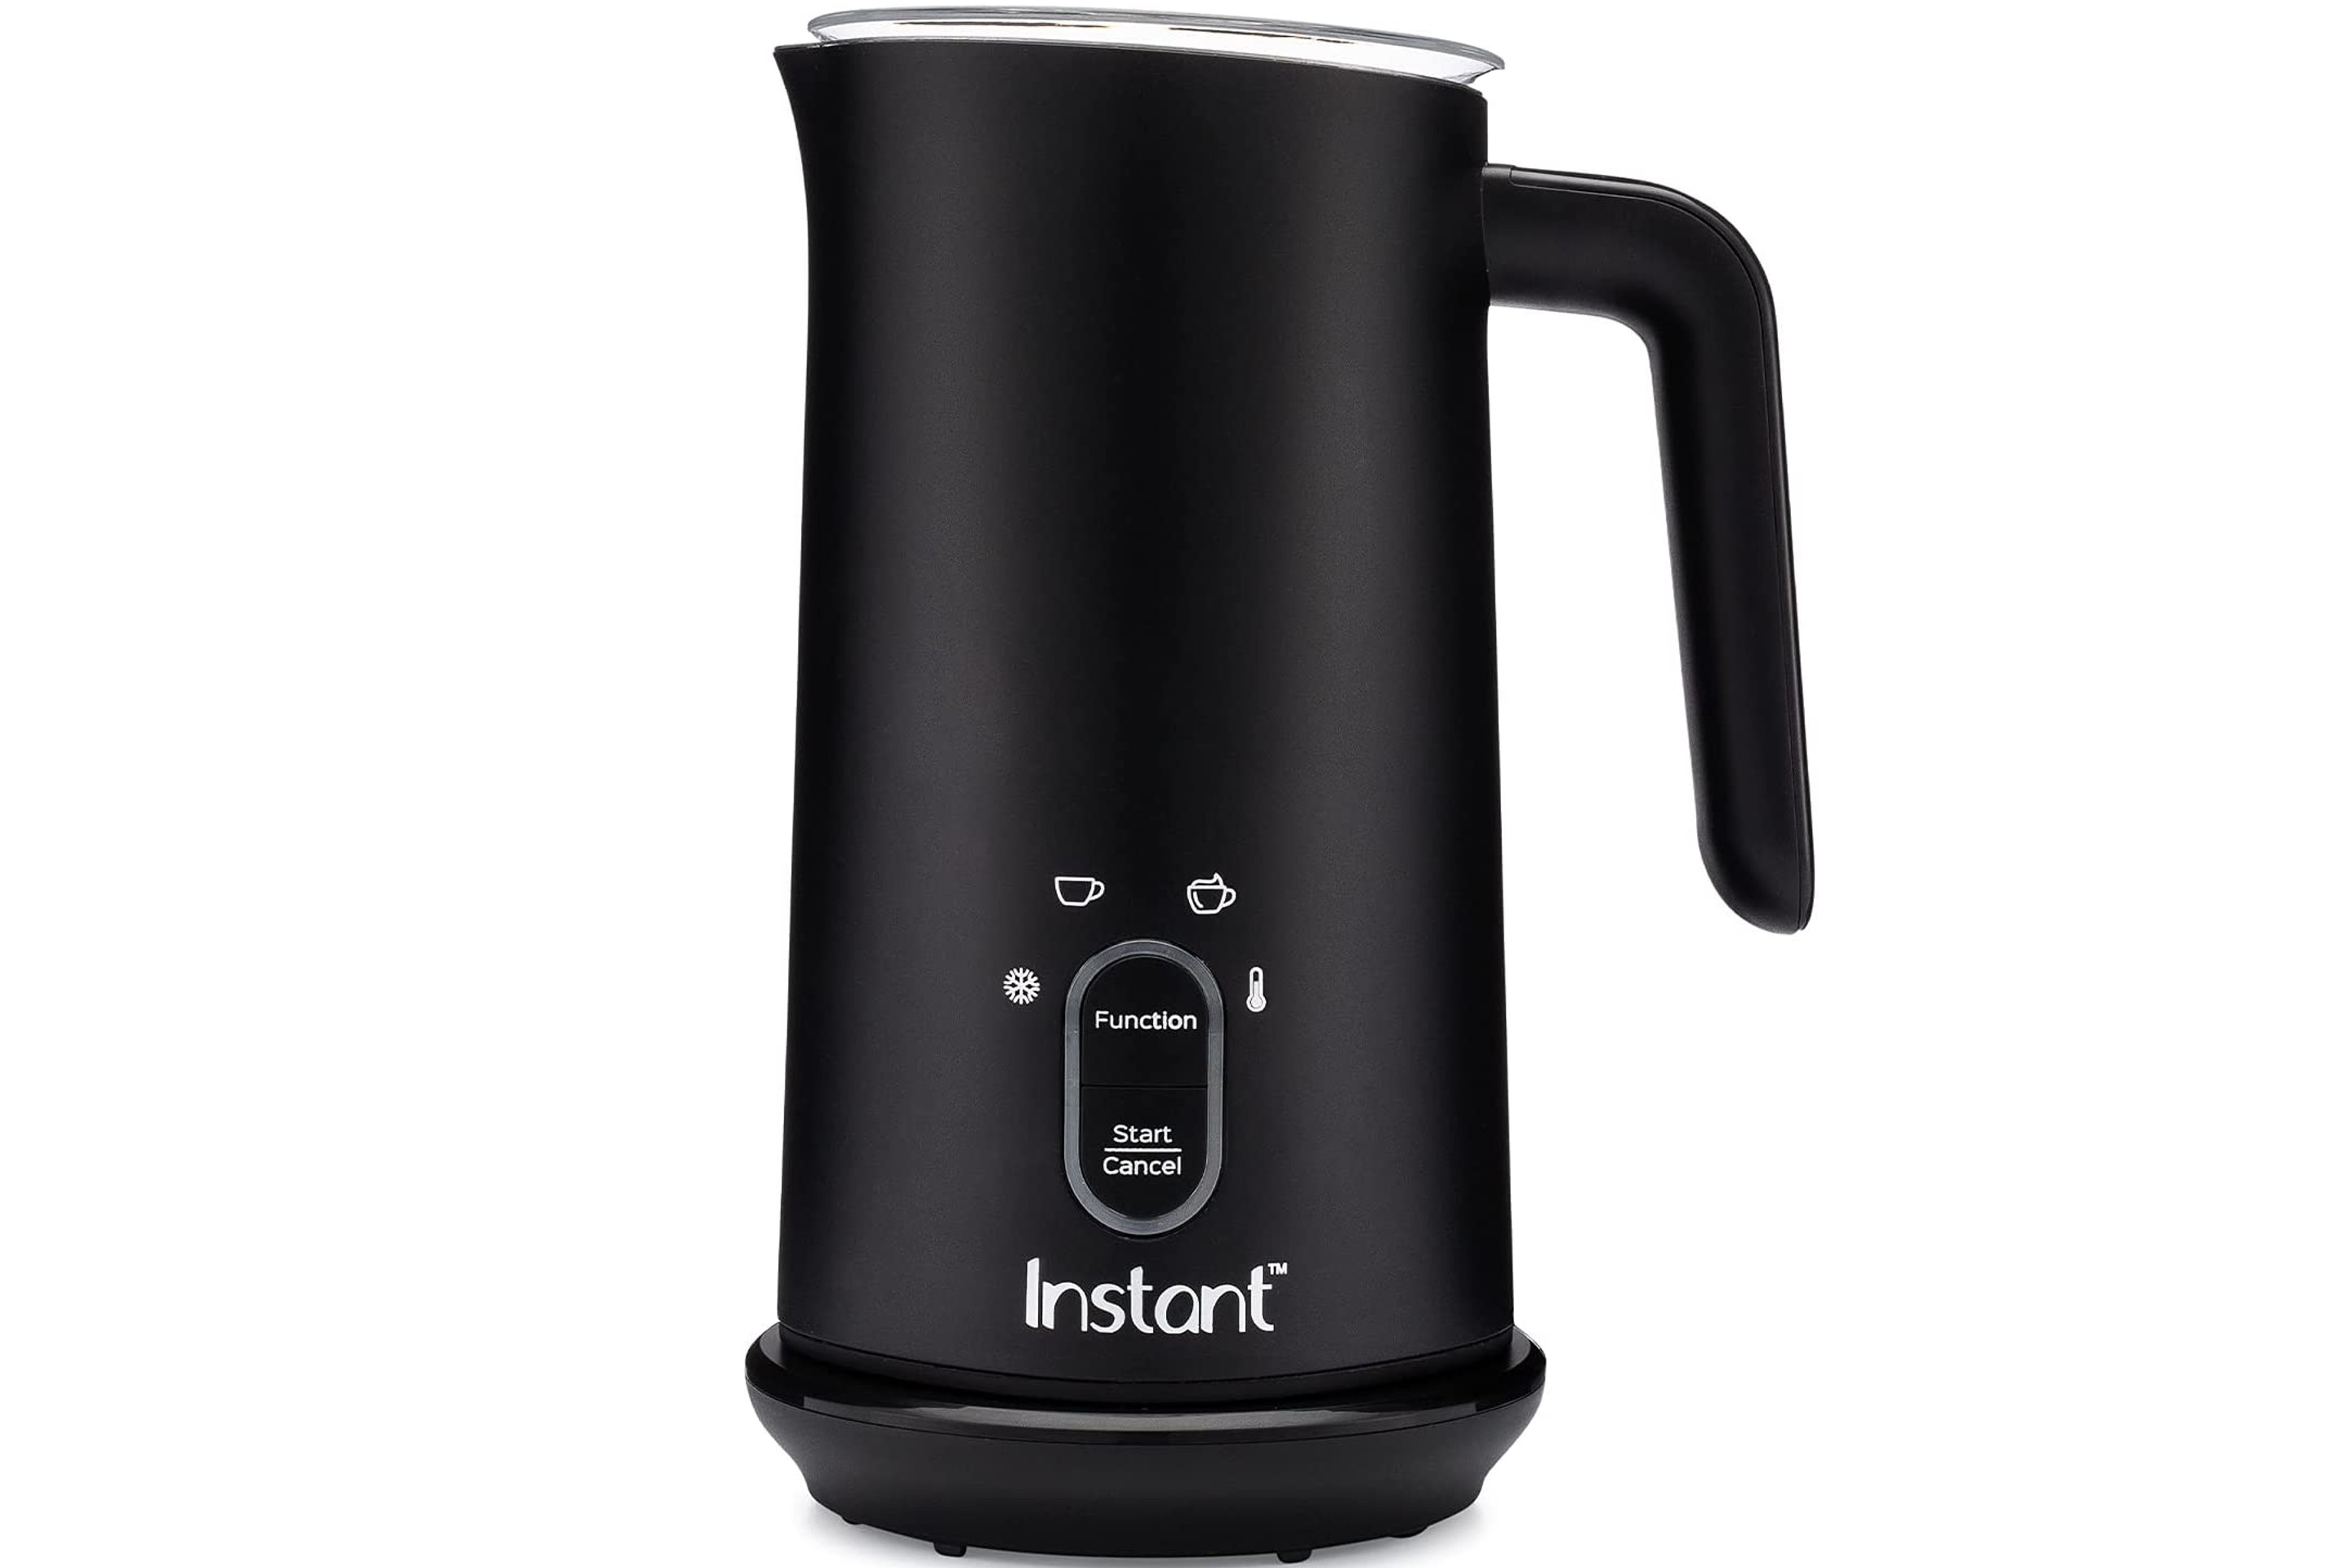 Instant Milk Frother, Steamer, and Warmer